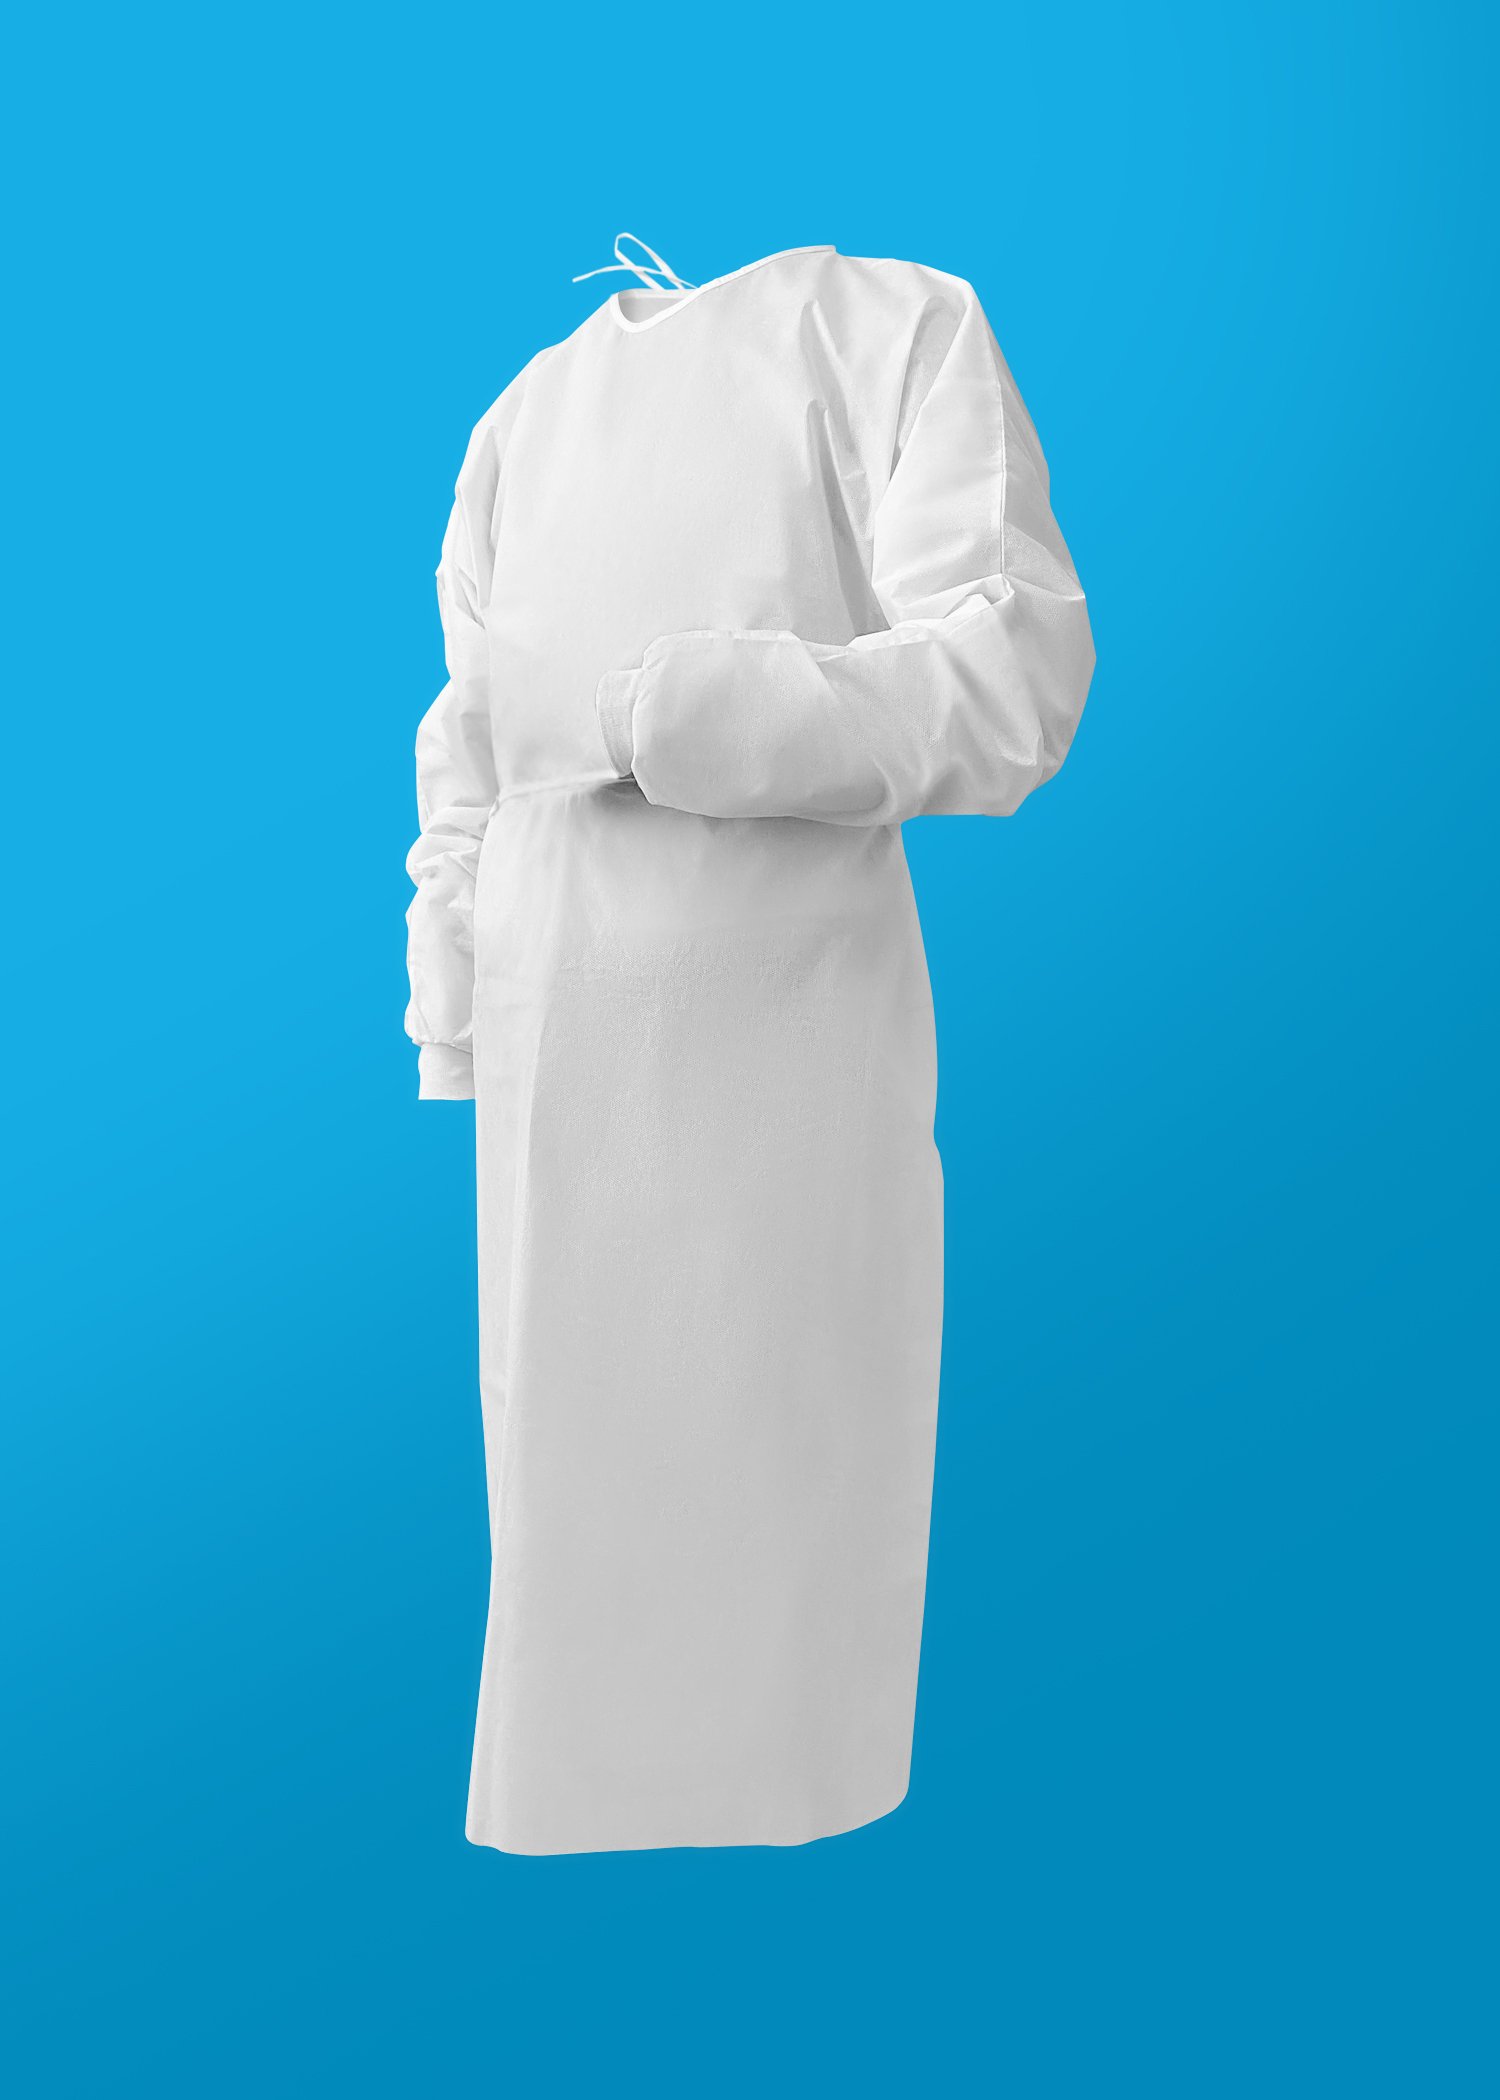 AAMI Level 4 Isolation Gown